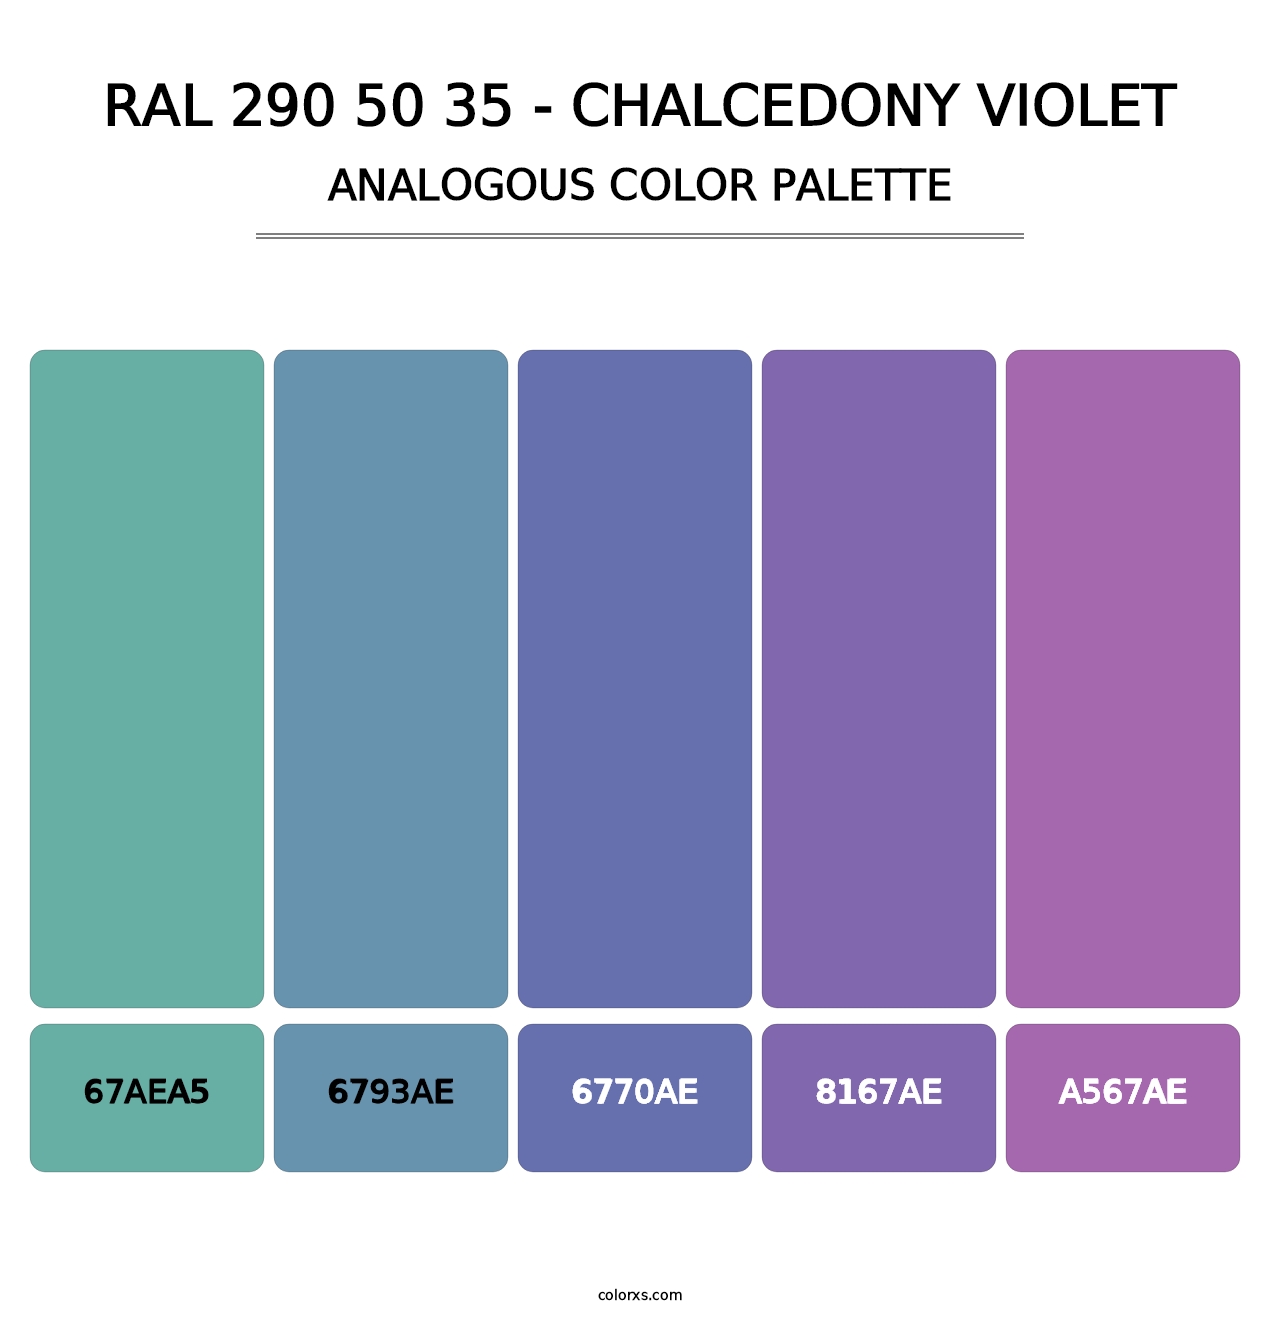 RAL 290 50 35 - Chalcedony Violet - Analogous Color Palette